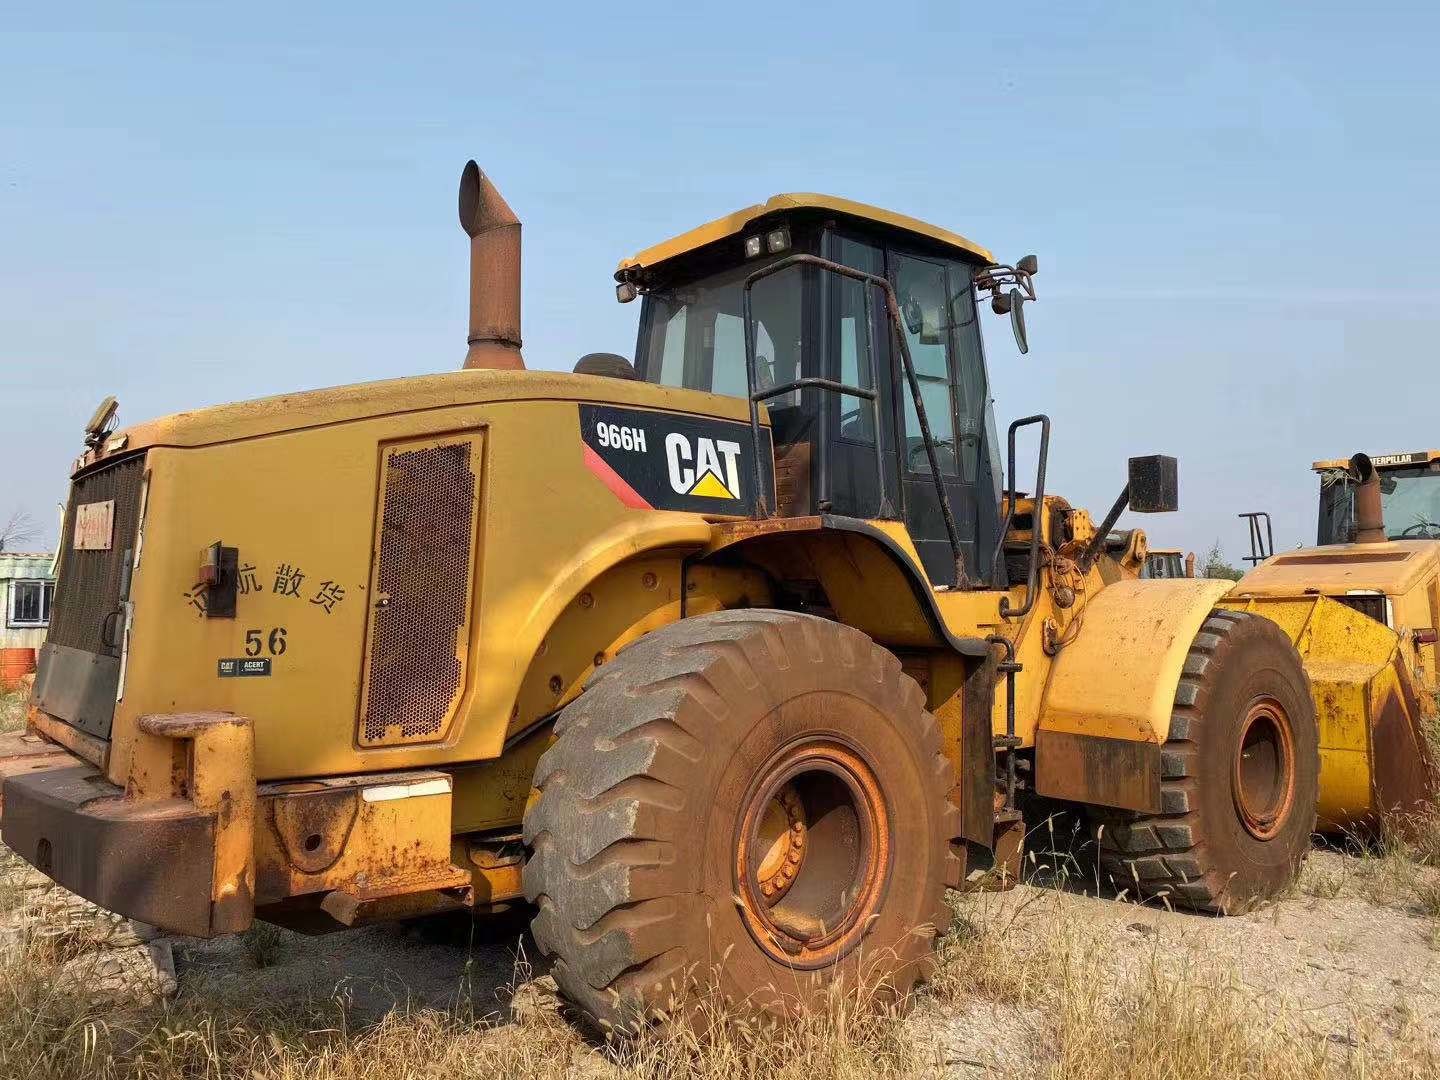 China Used Caterpillar 966H Wheel Loader In Excellent Condition,Used CAT 966H Wheel Loader for sale on sale